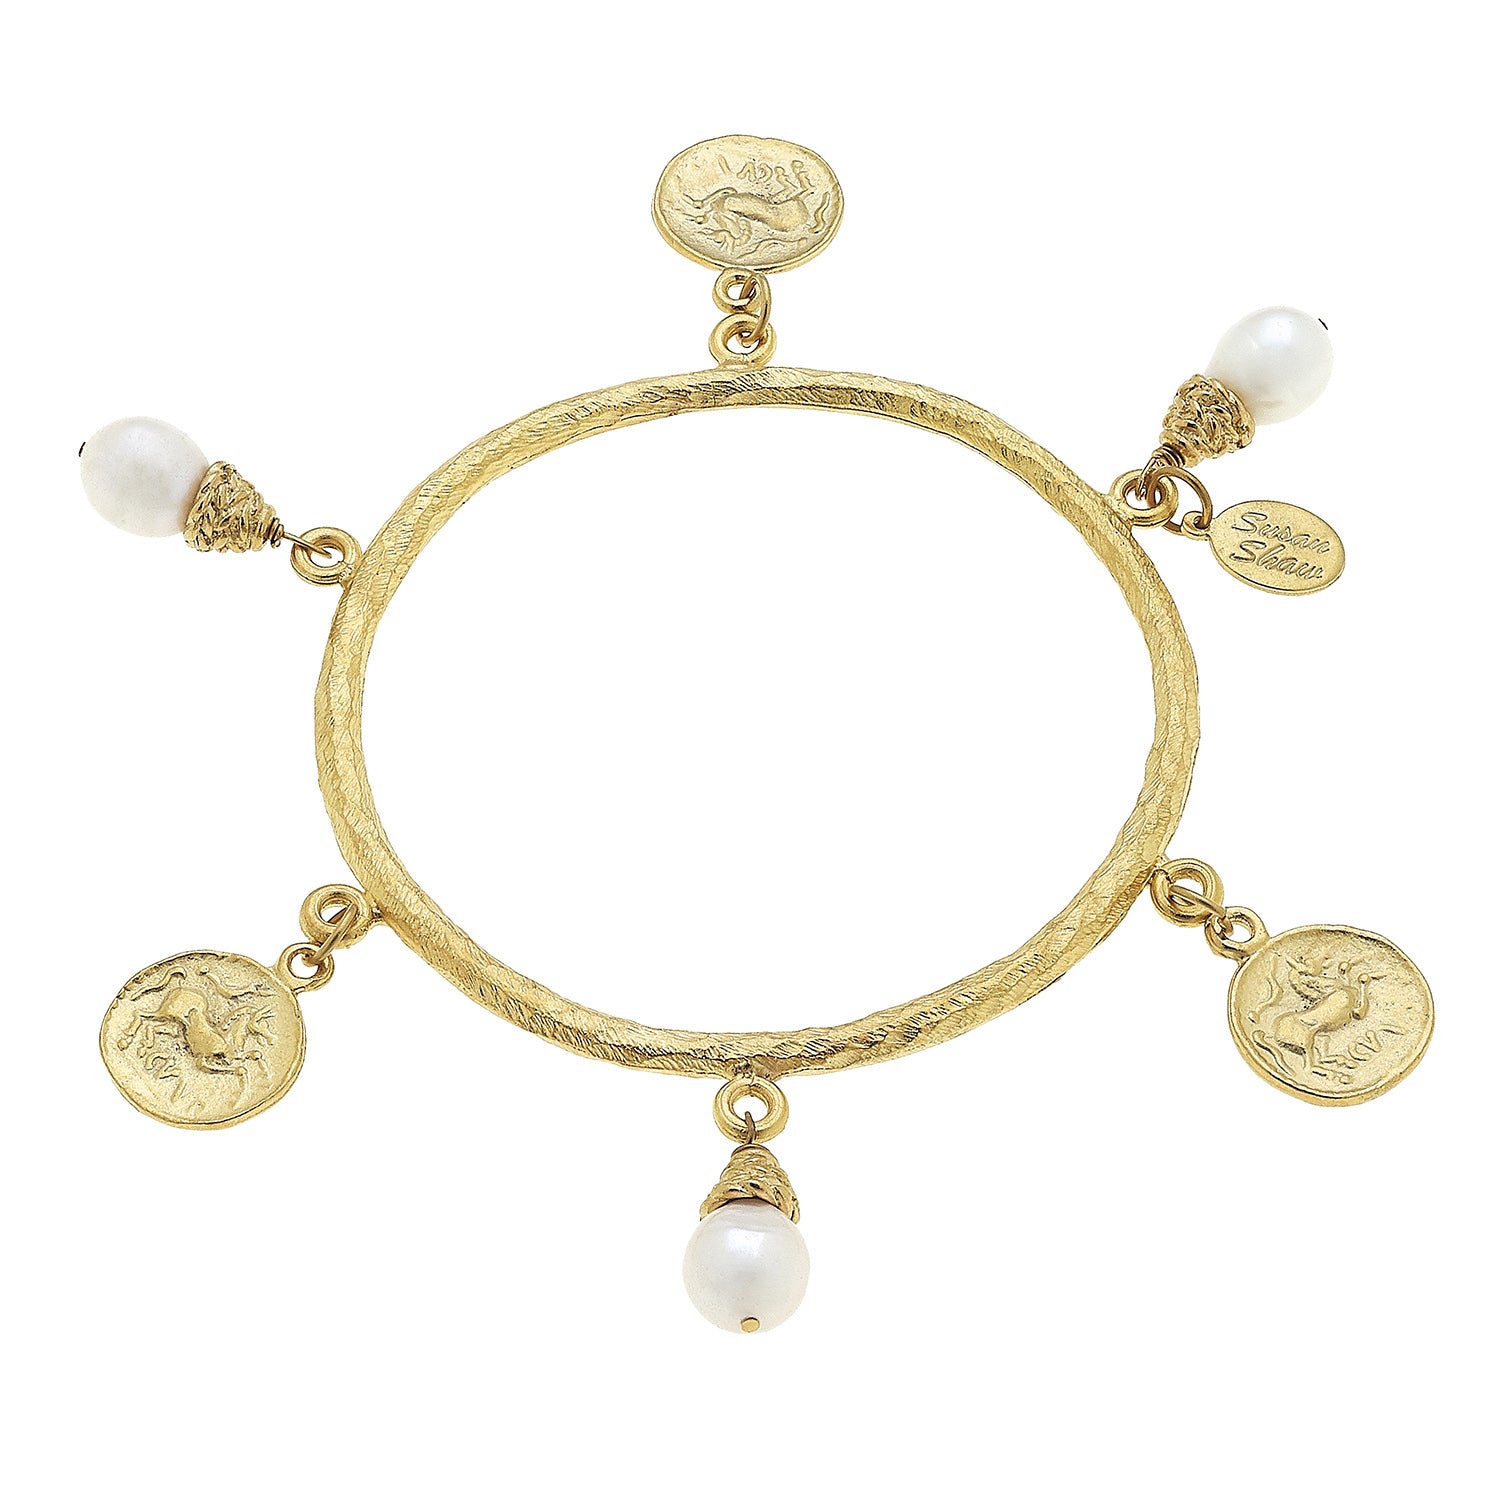 Susan Shaw Jewelry Cross Bangle Bracelet, Freshwater Pearls and Cross Charms in Gold